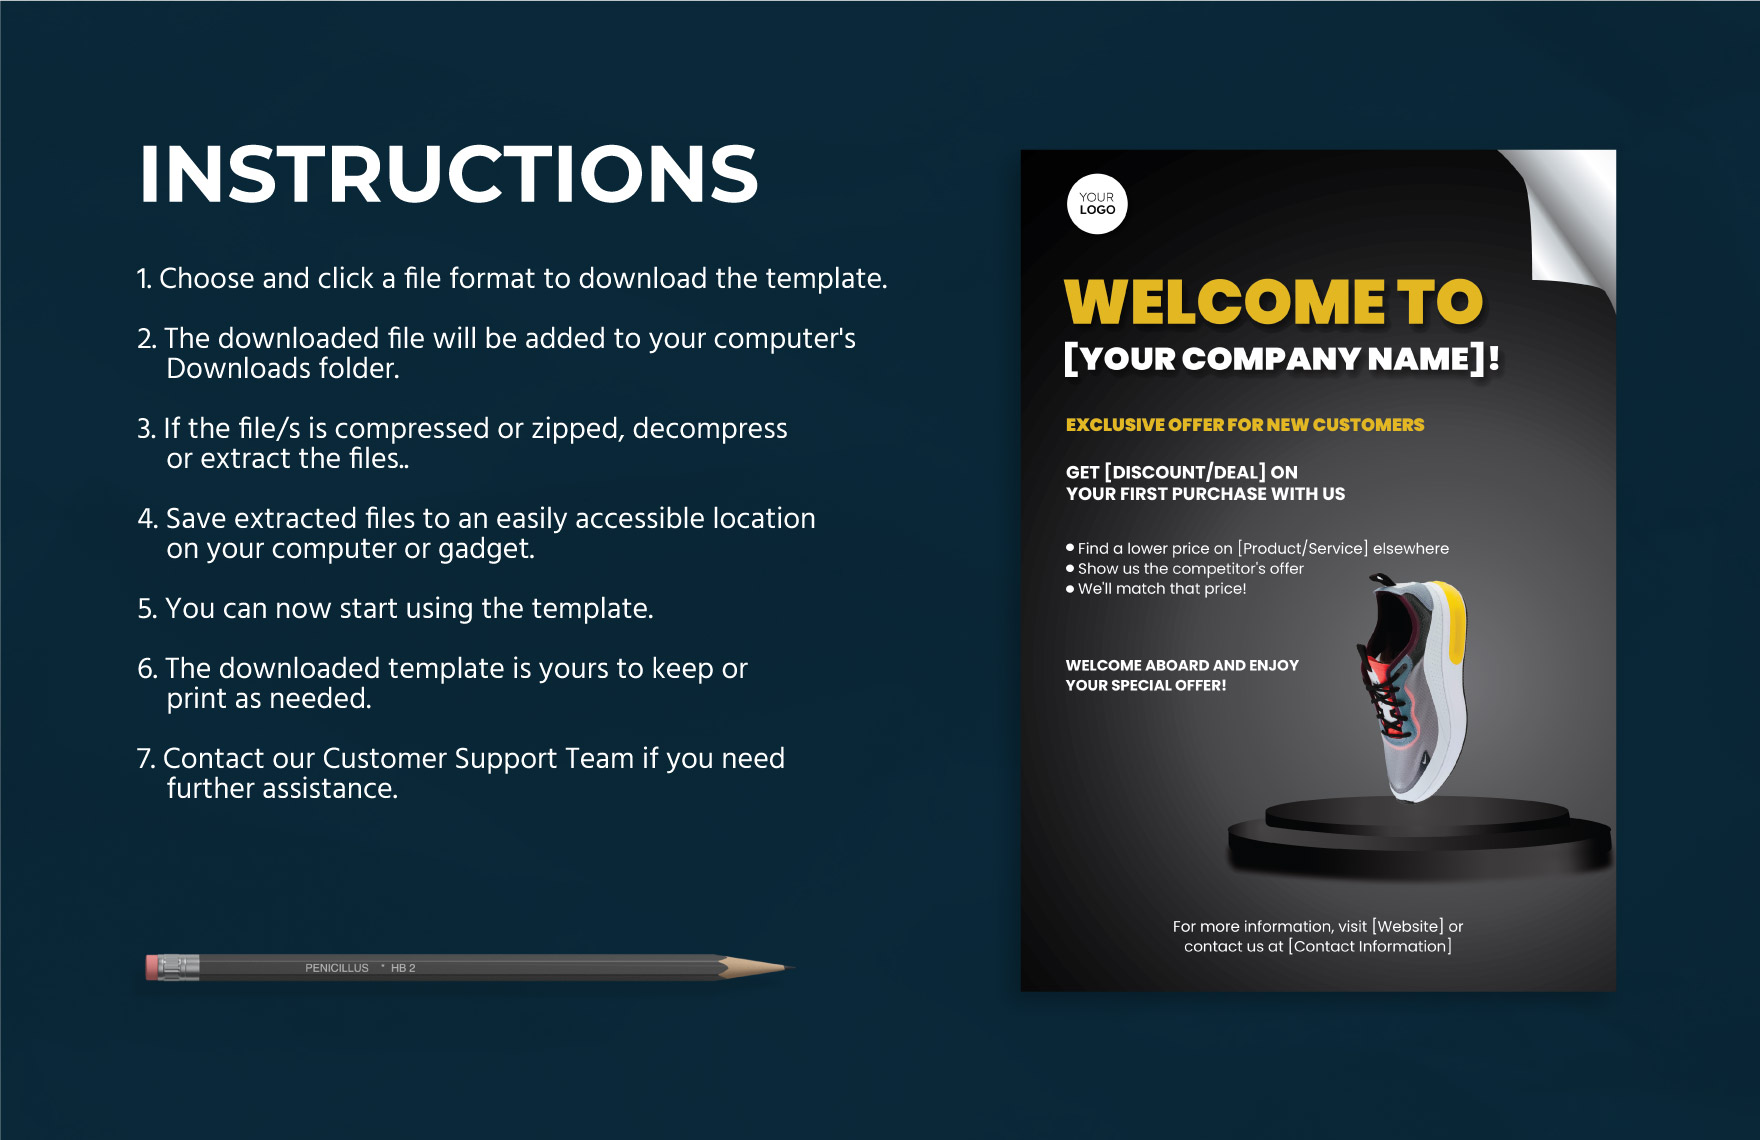 Sales New Customer Welcome Offer Flyer Template